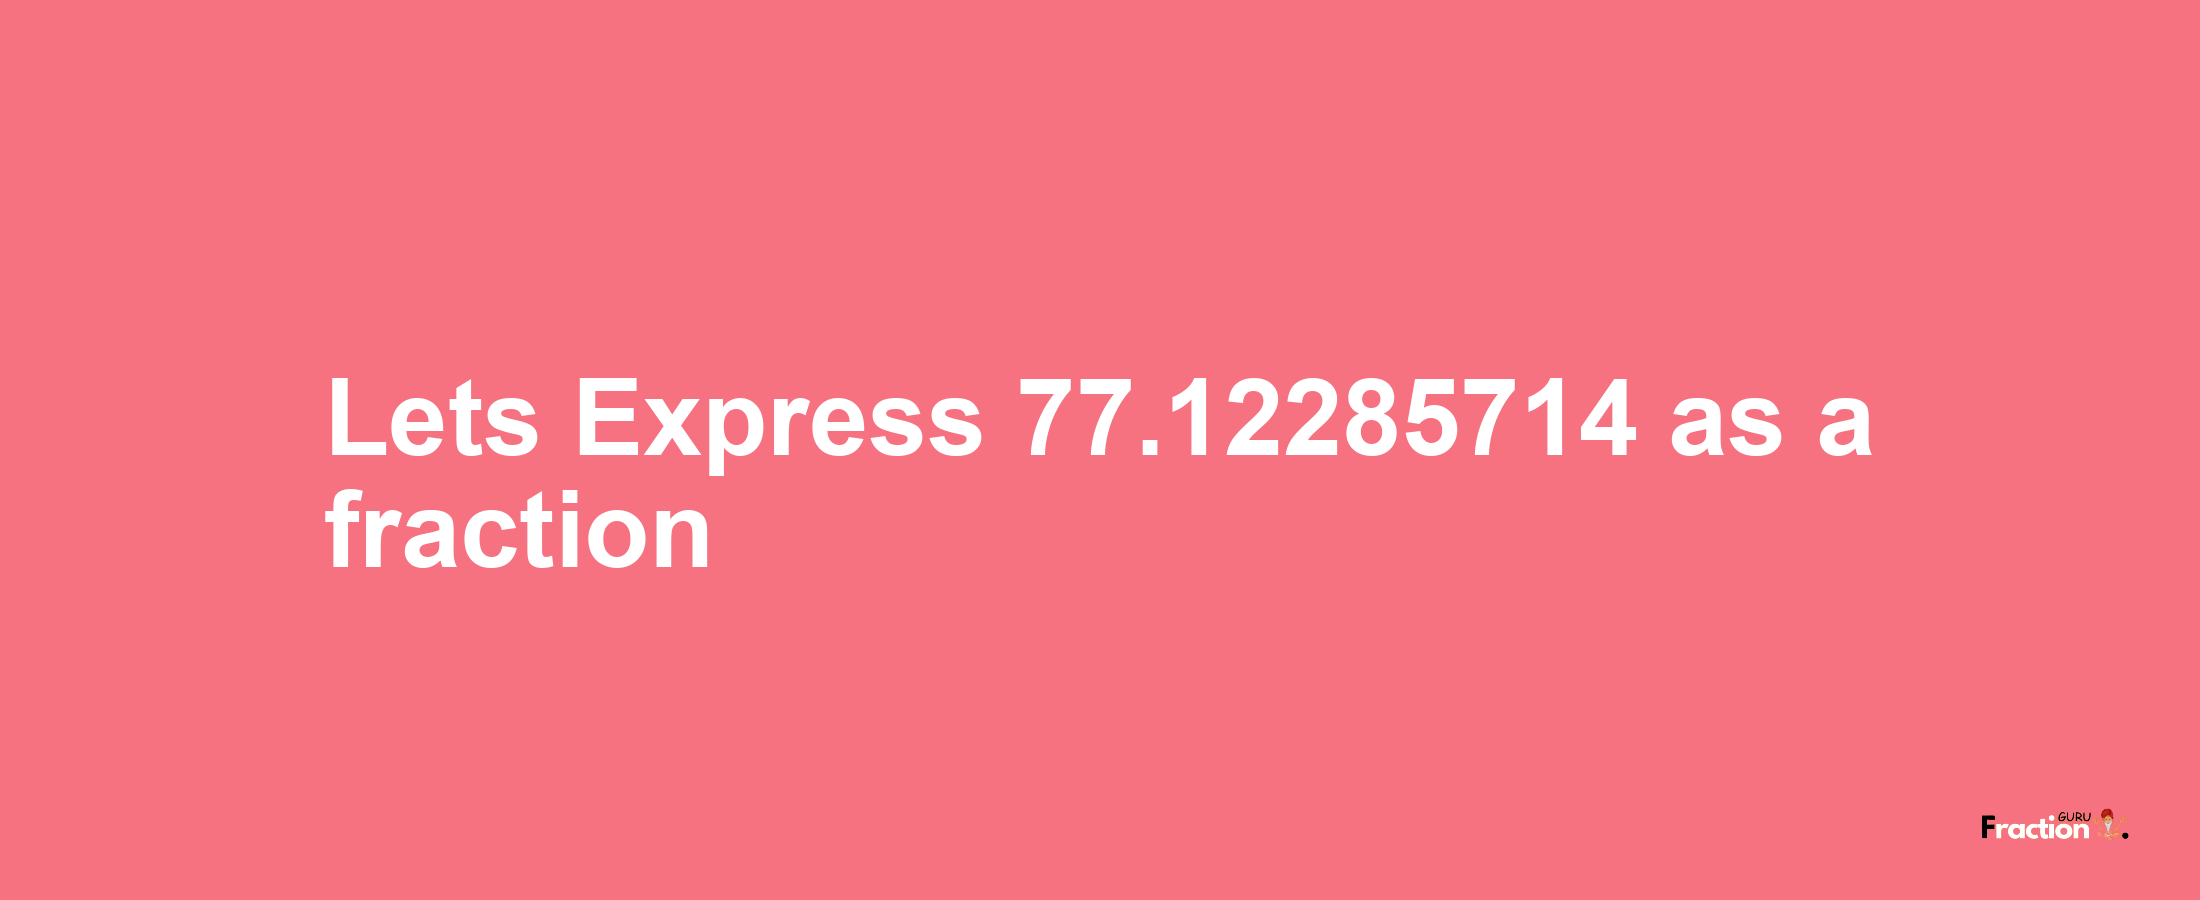 Lets Express 77.12285714 as afraction